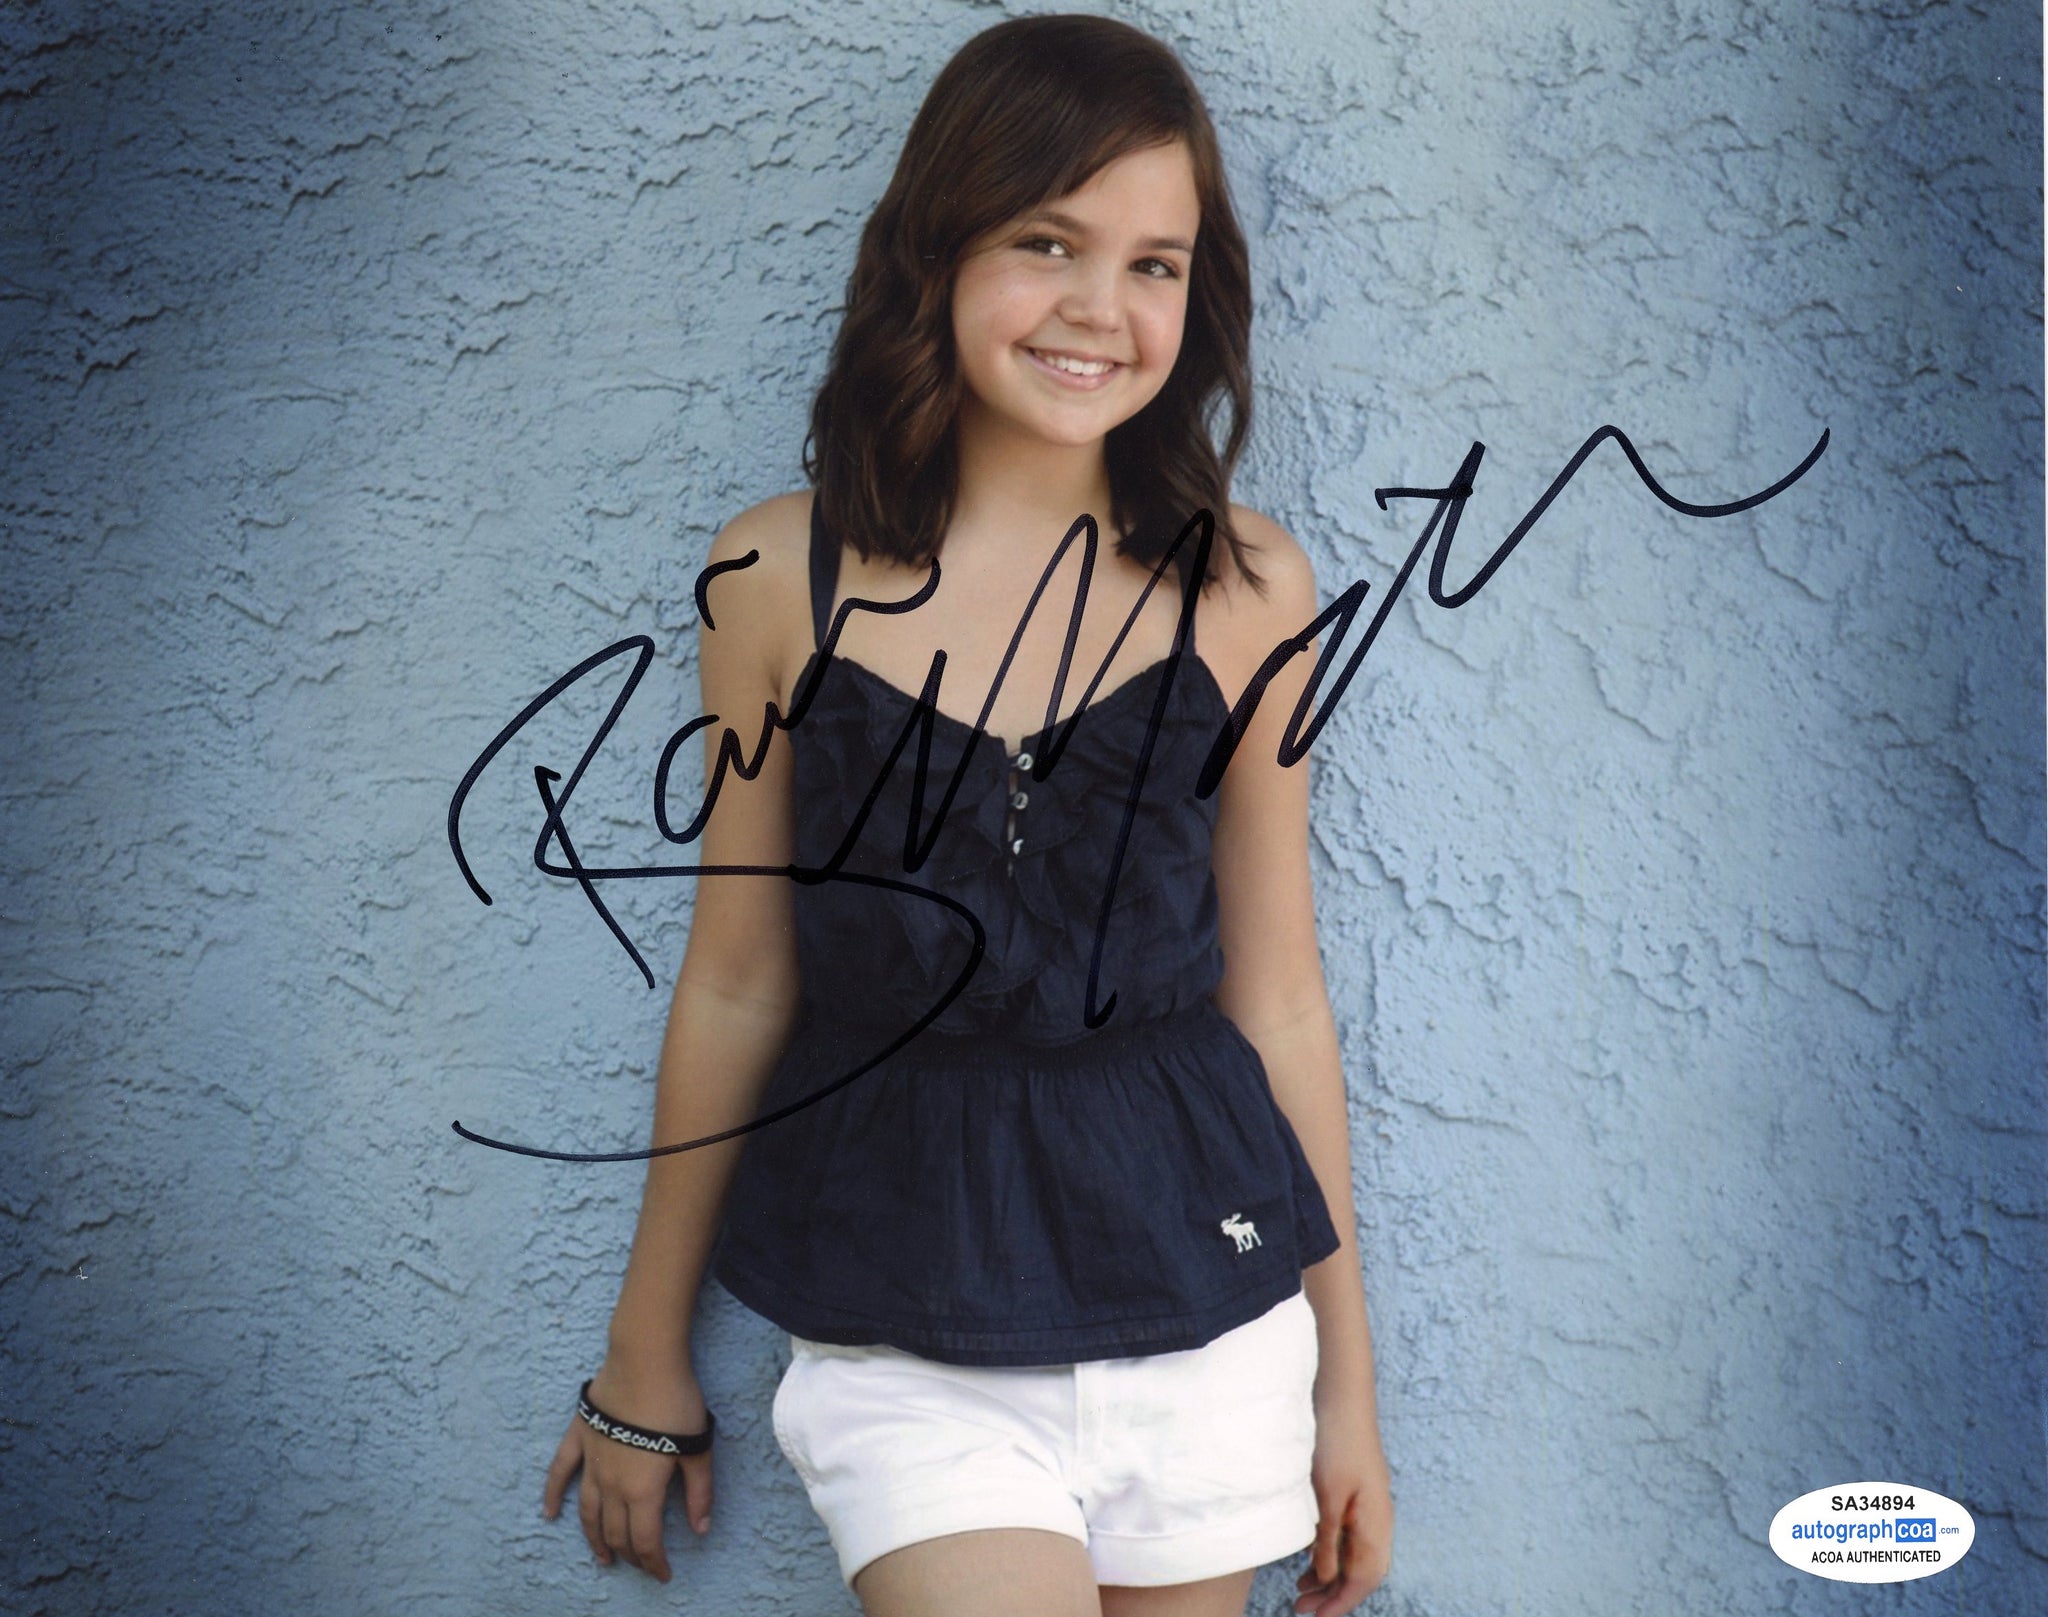 Bailee Madison Sexy Signed Autograph 8x10 Photo ACOA #72 - Outlaw Hobbies Authentic Autographs